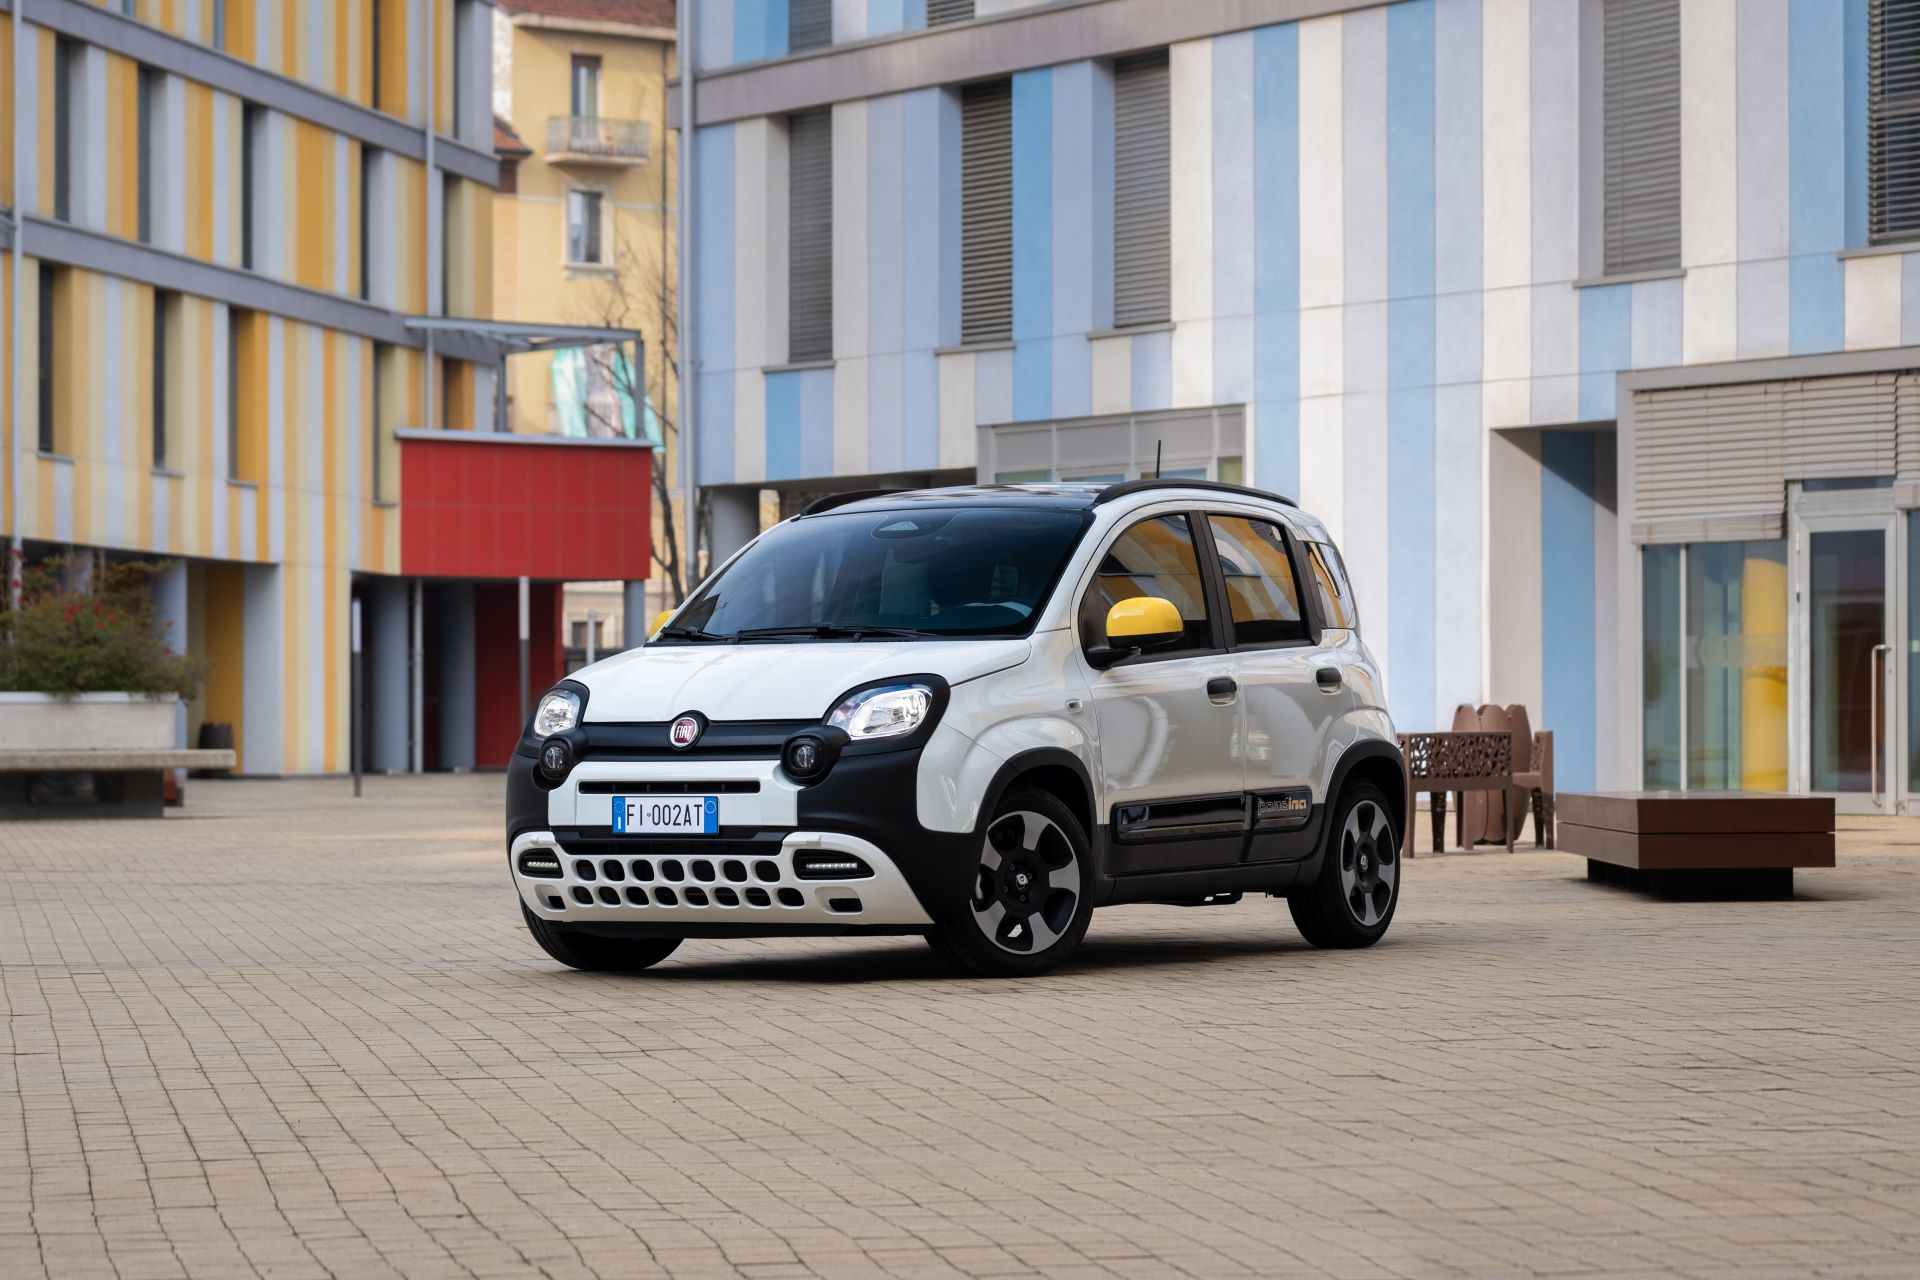 Fiat Pandina celebrates people’s love for the Panda and the production extension at least until 2027 in the Plant of Pomigliano d’Arco, Italy